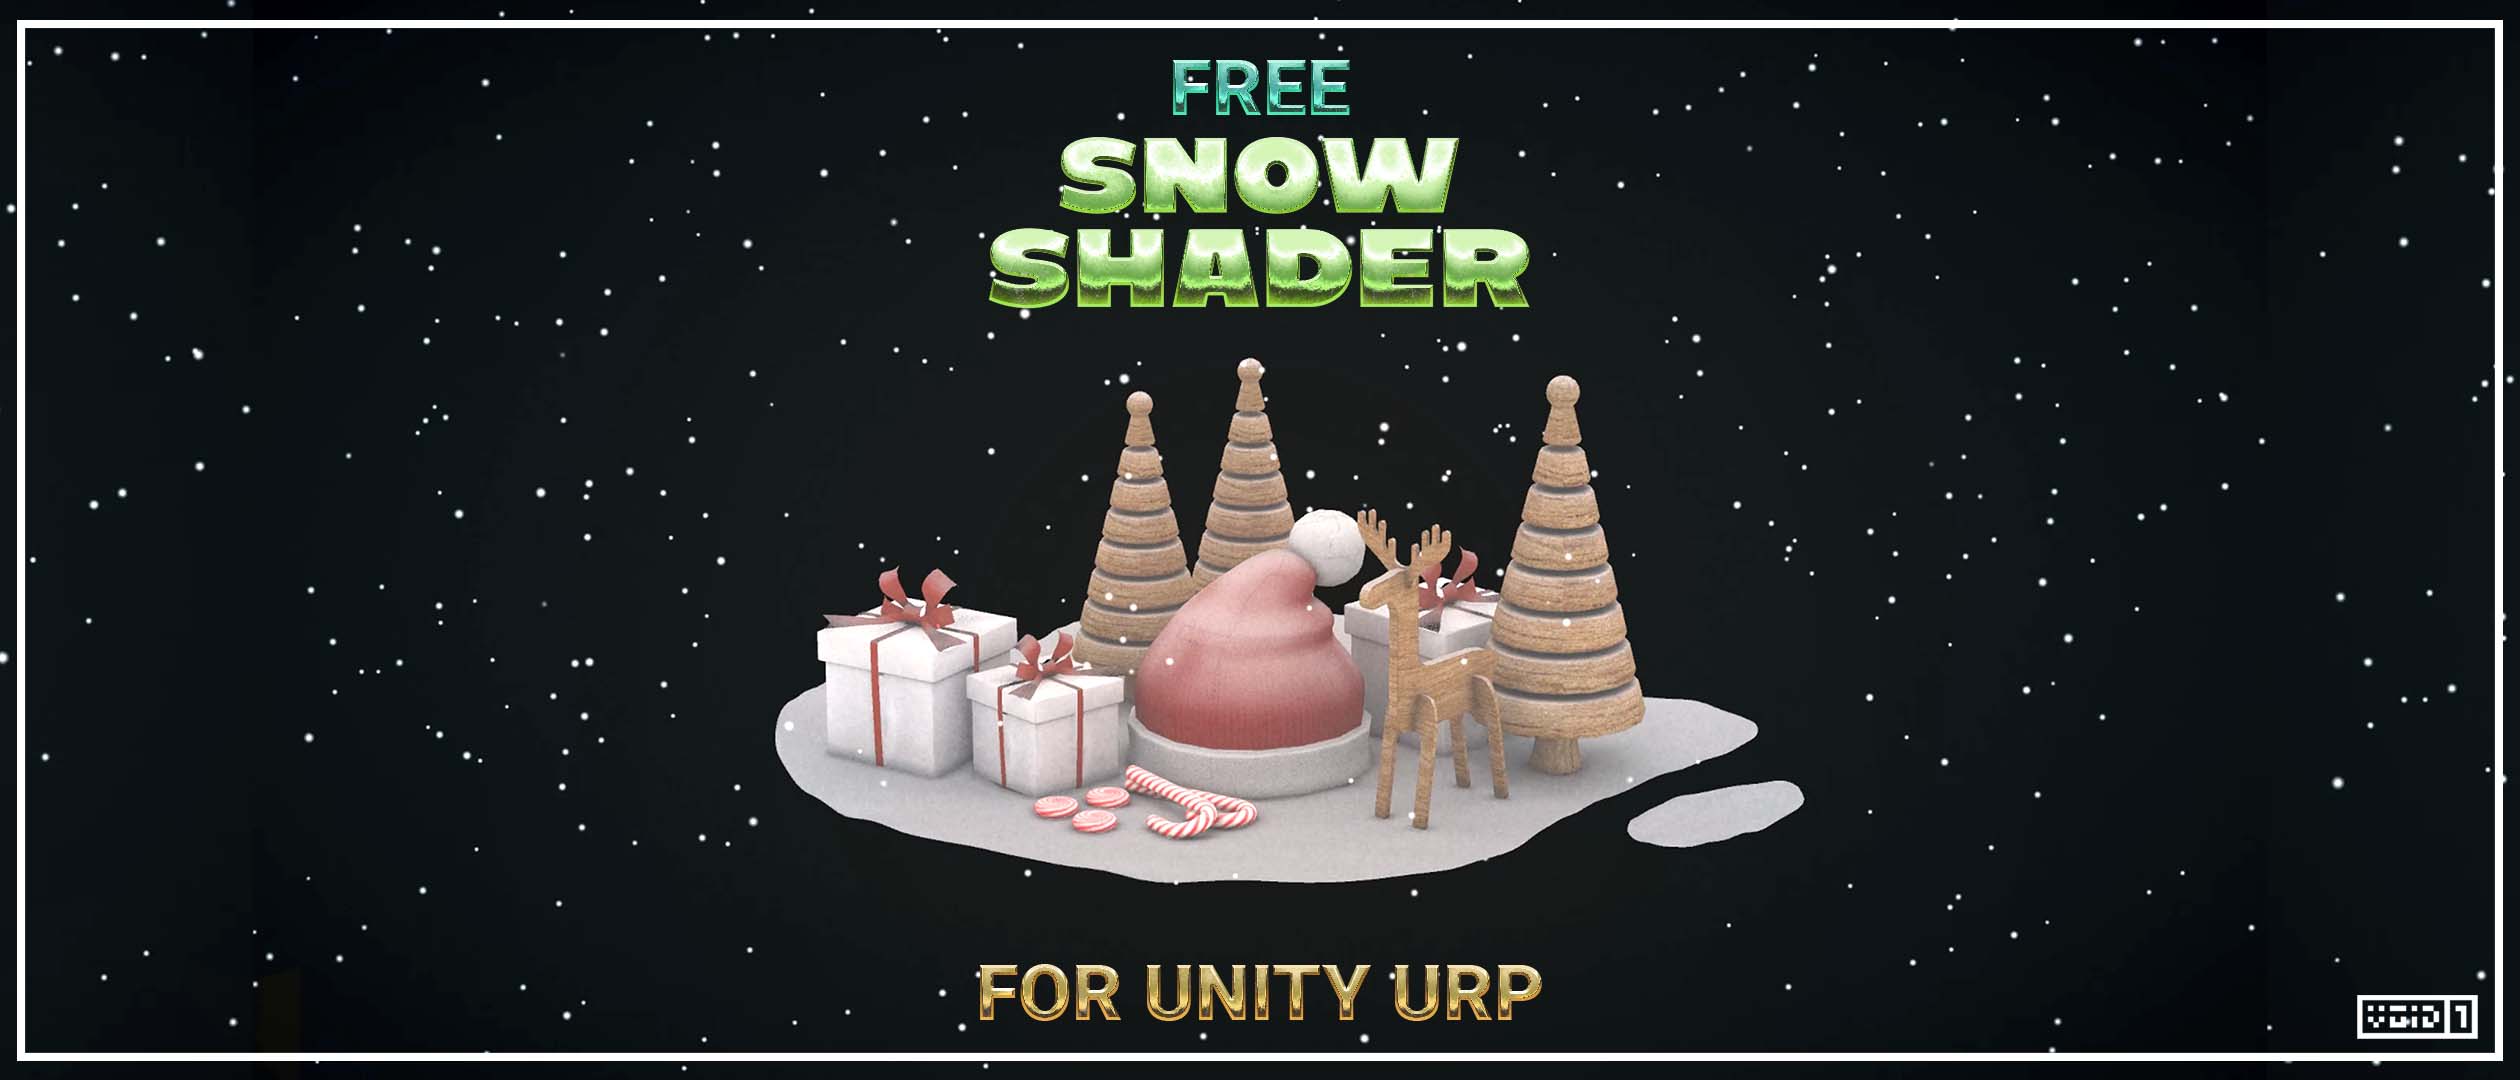 Free Snow Shader for Unity URP